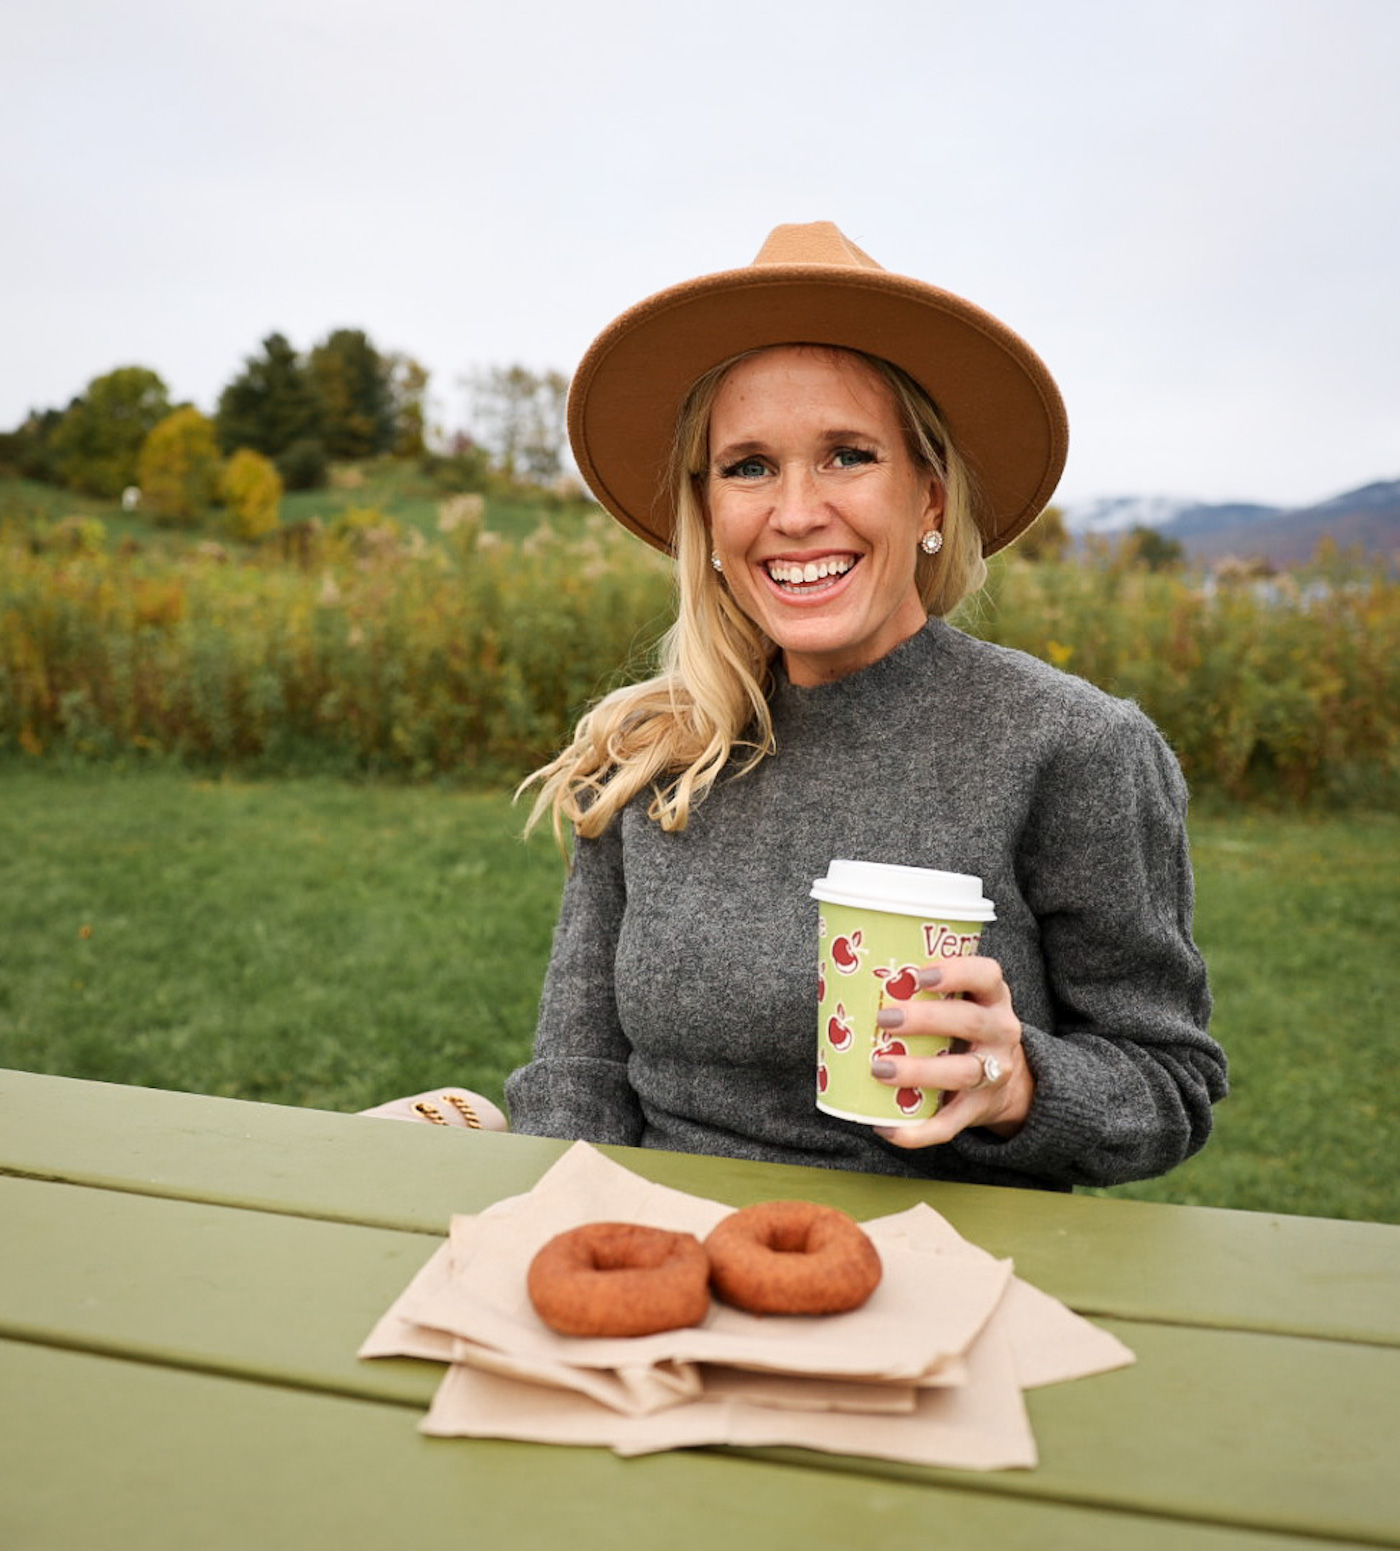 Guide to Stowe, Vermont in the Fall | 11 Things To Do + Tips | Leaf peeper season in Vermont |
 Fall outfit ideas | Maternity outfits in the fall | apple cider donuts in Stowe, Vermont